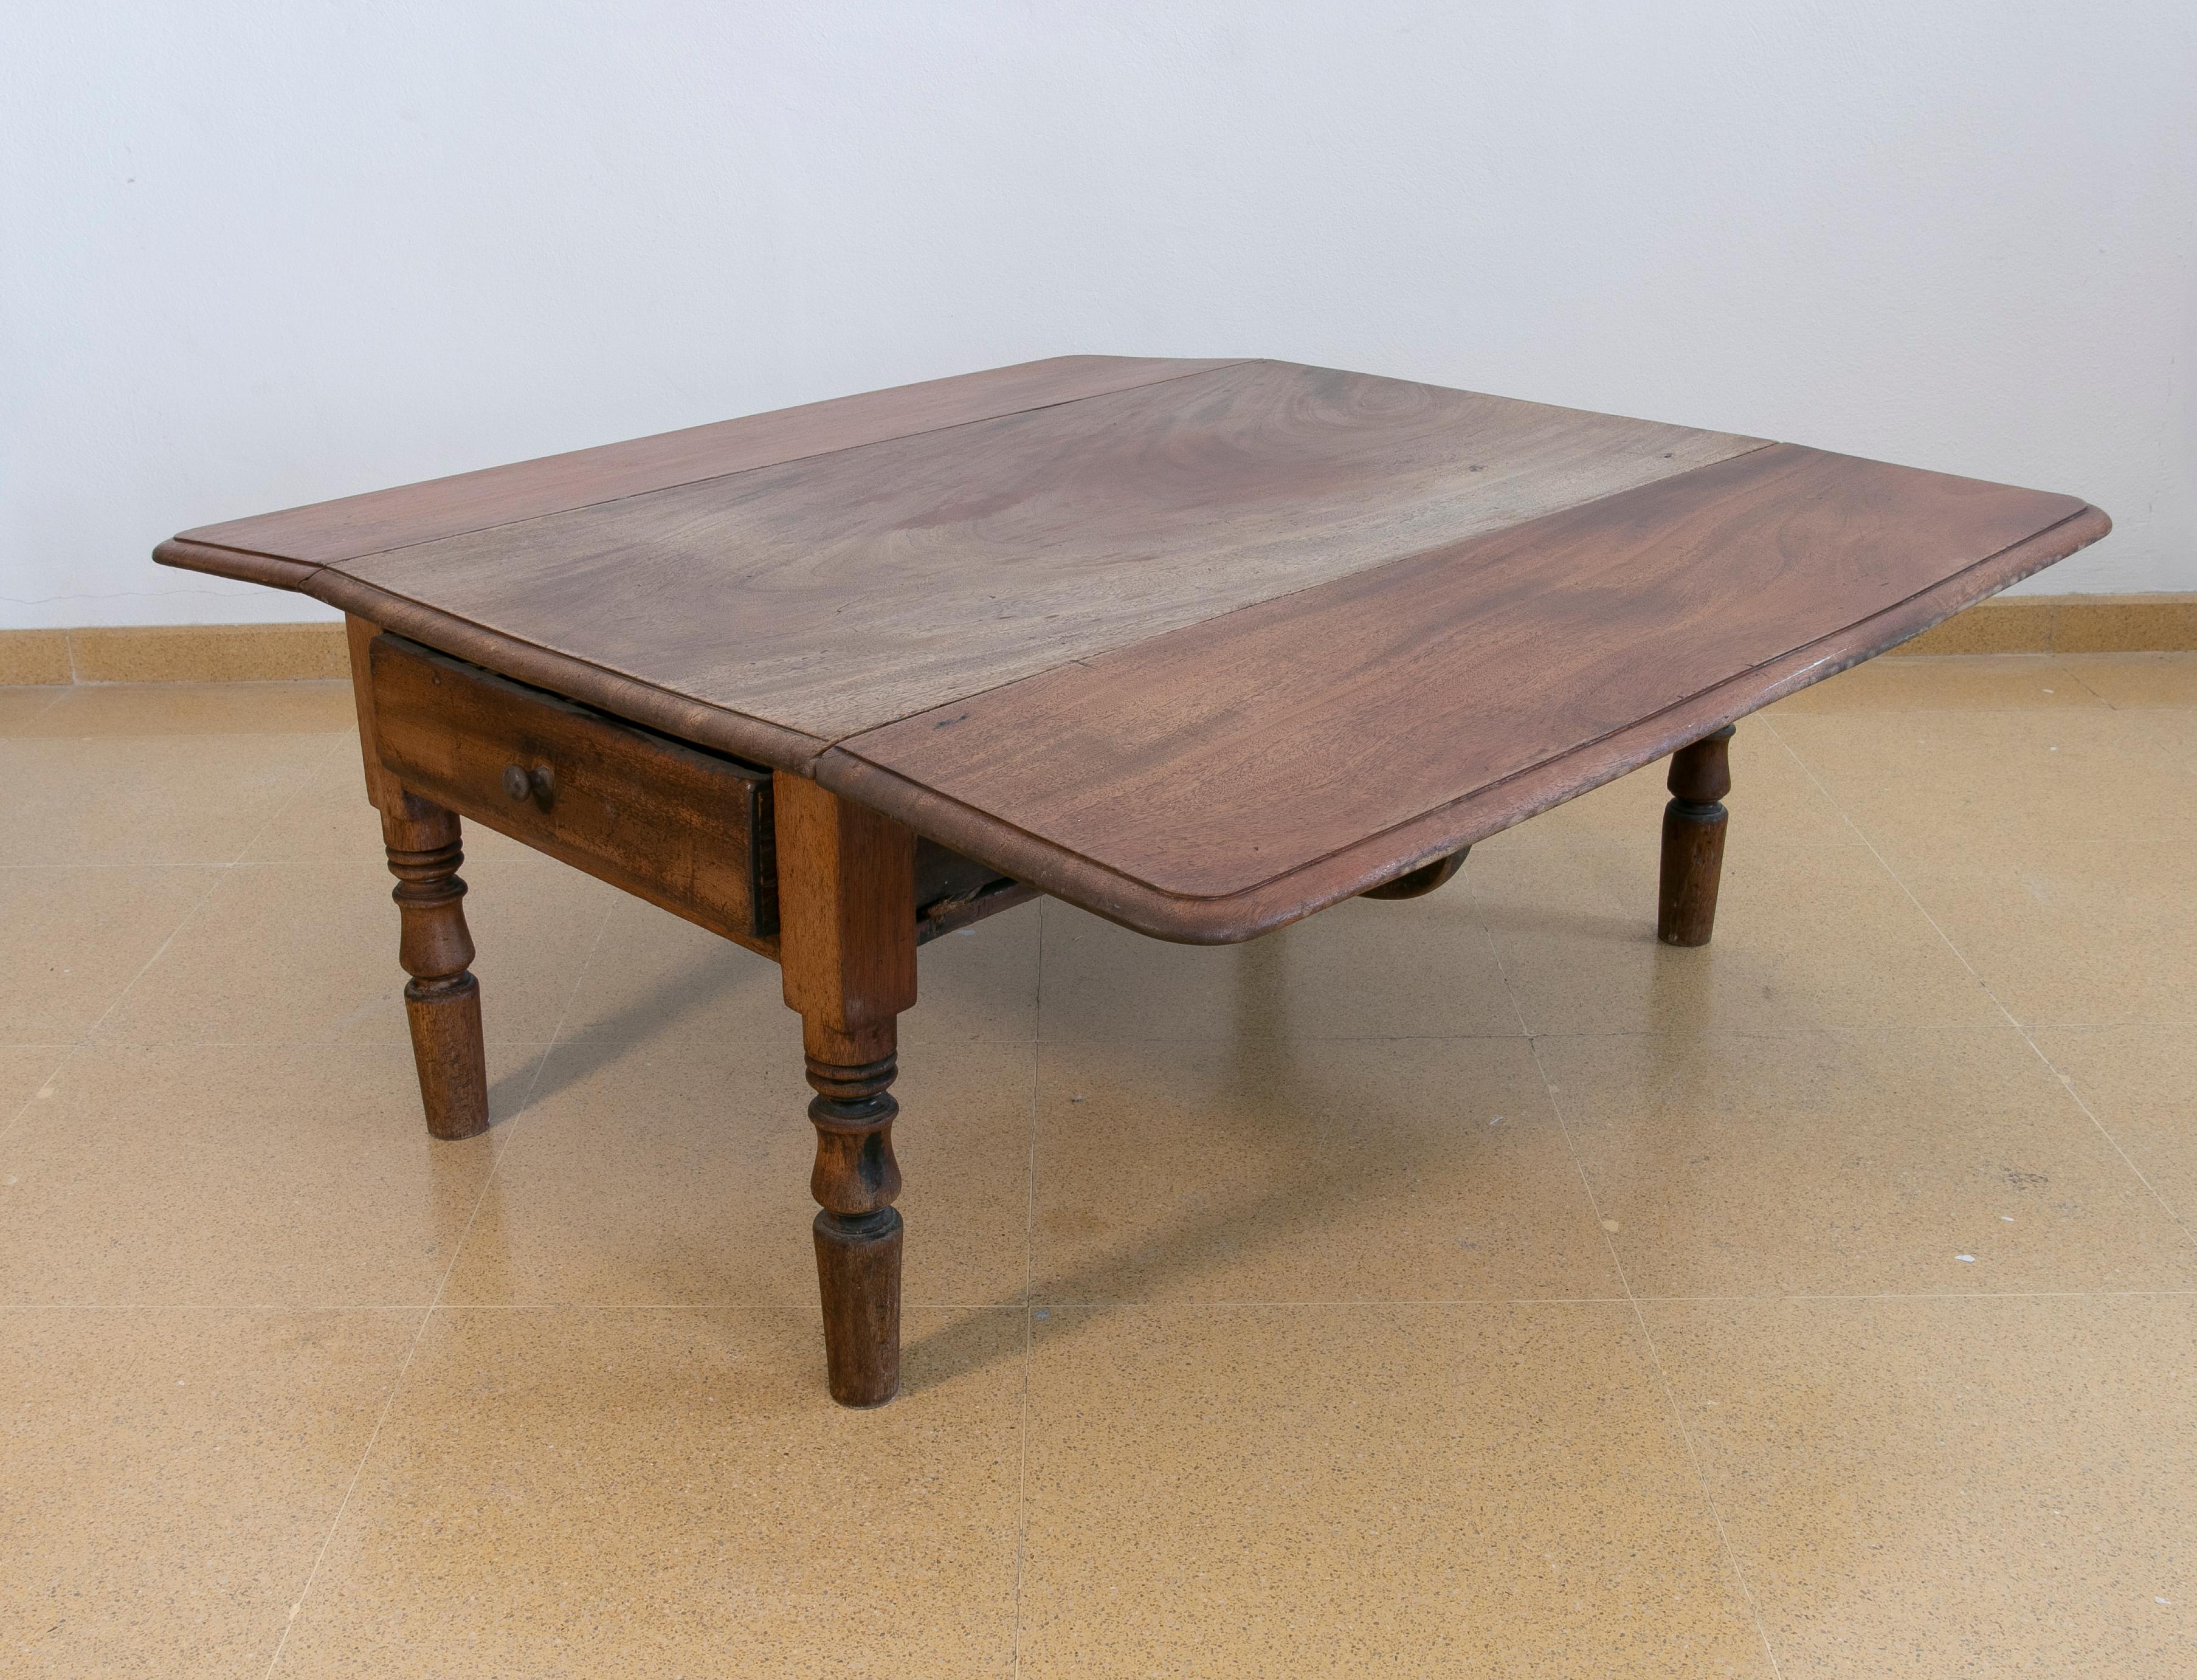 Wooden coffee wing table with drawers on the side
The Dimensions of the Open Table are: 45x106x113cm.